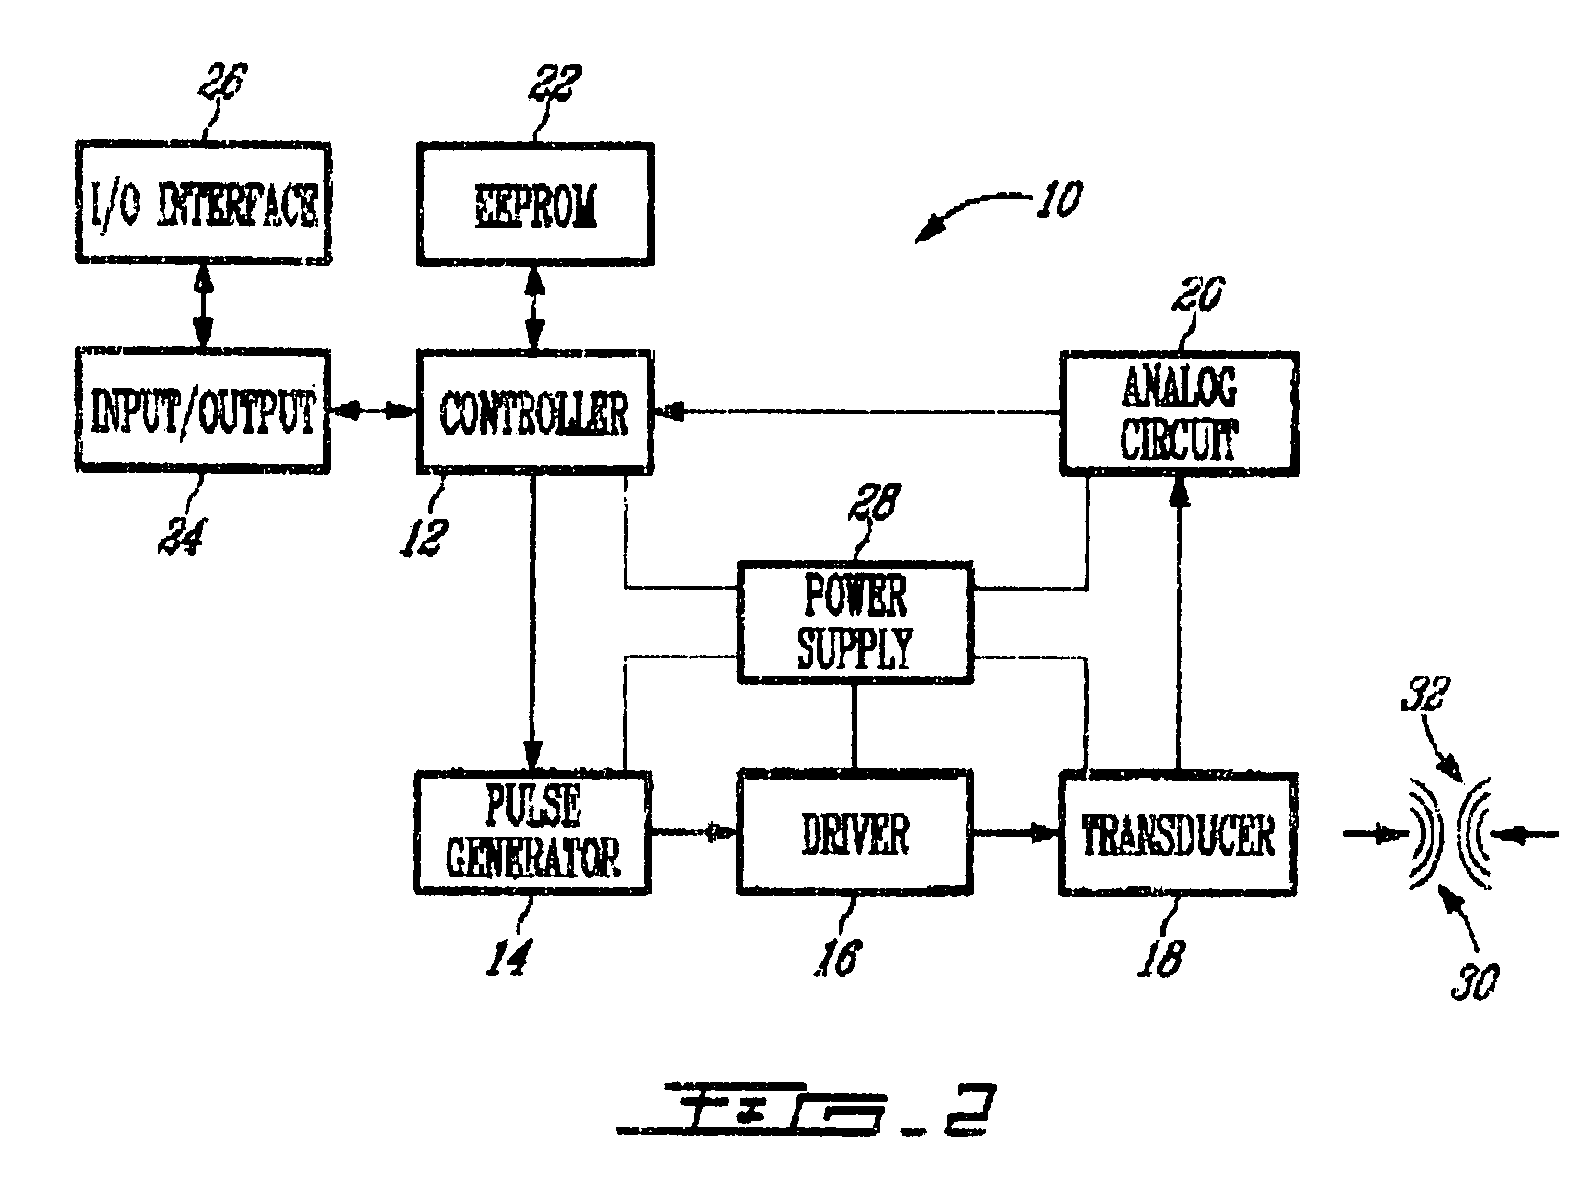 Method and system for measuring fluid level in a container